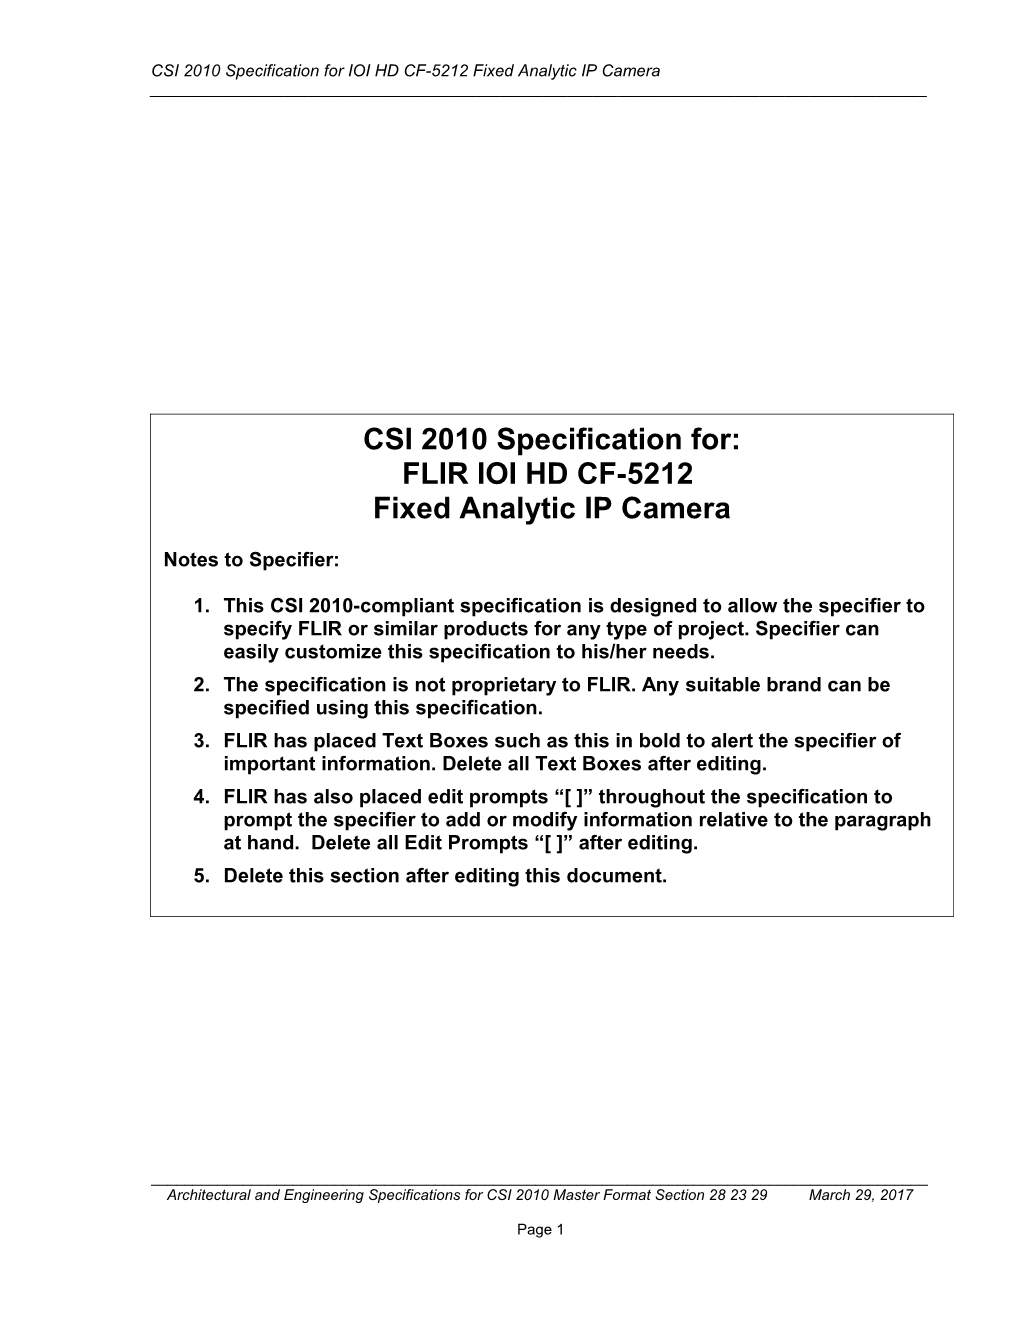 CSI 2010 Specification for Sc1dn-S